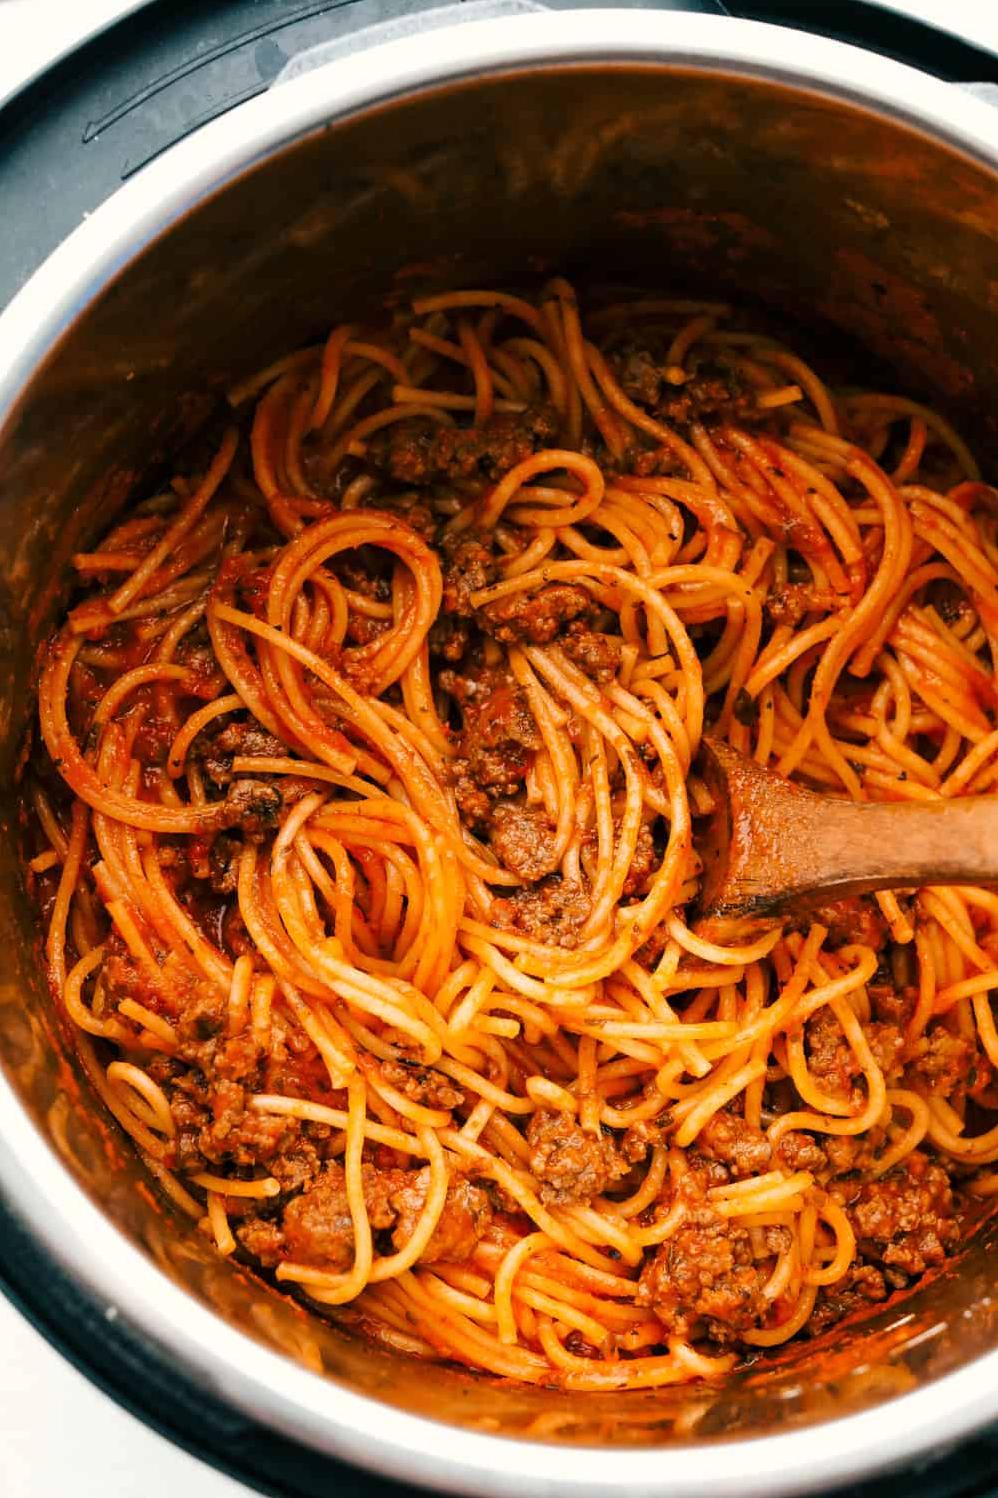  Feel like a chef with this easy-to-make instant pot spaghetti.